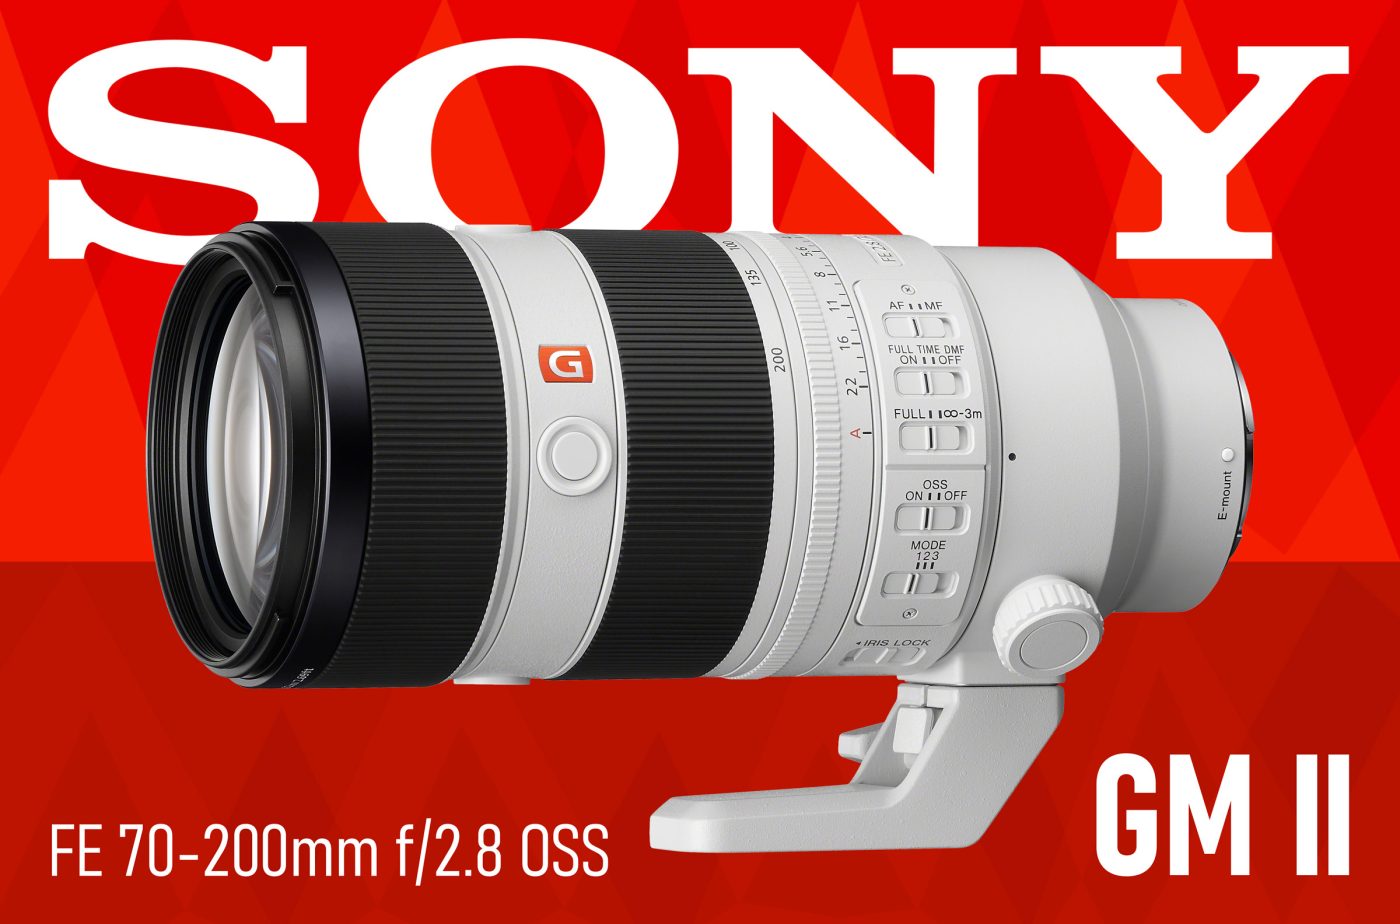 Sony 70-200mm f/2.8 GM II Review  The Ultimate Lightweight 70-200 Portrait  Lens?